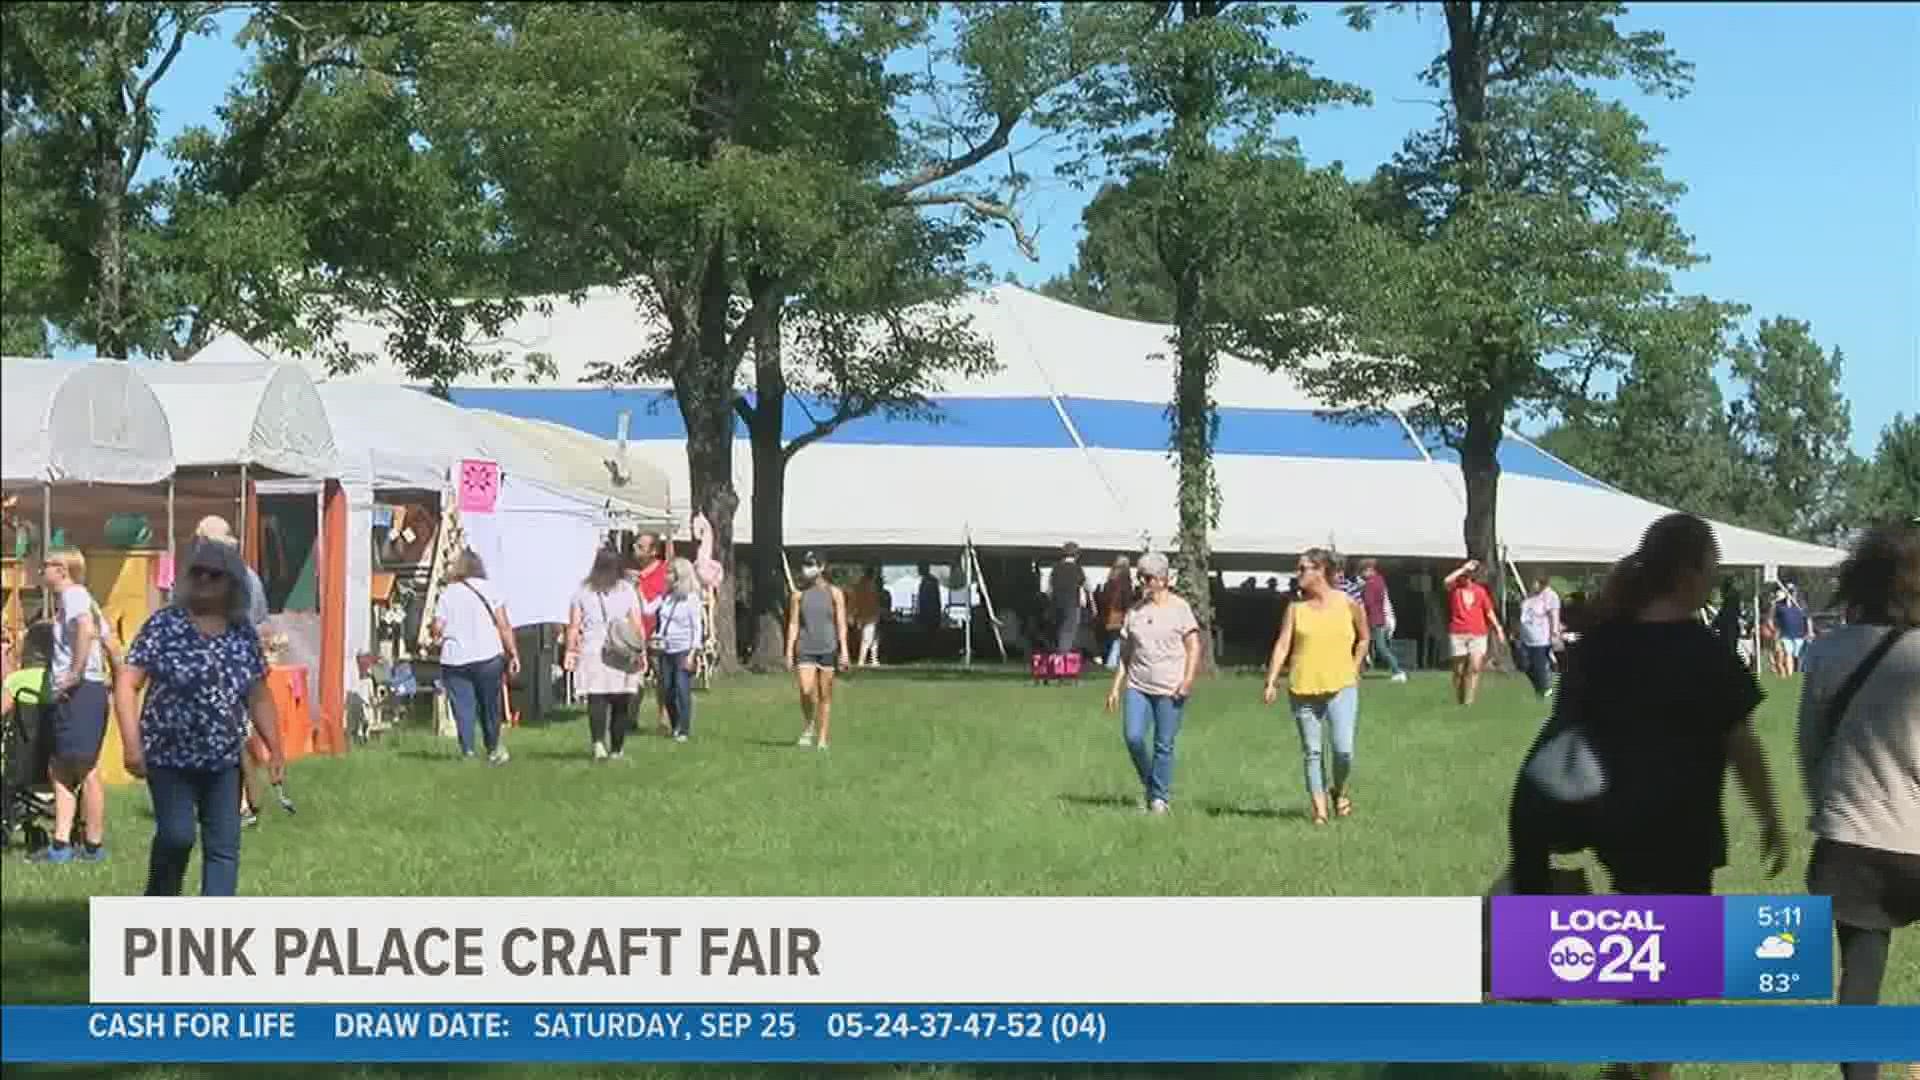 The Pink Palace Arts & Crafts Fair returned for its 49th year over the weekend.